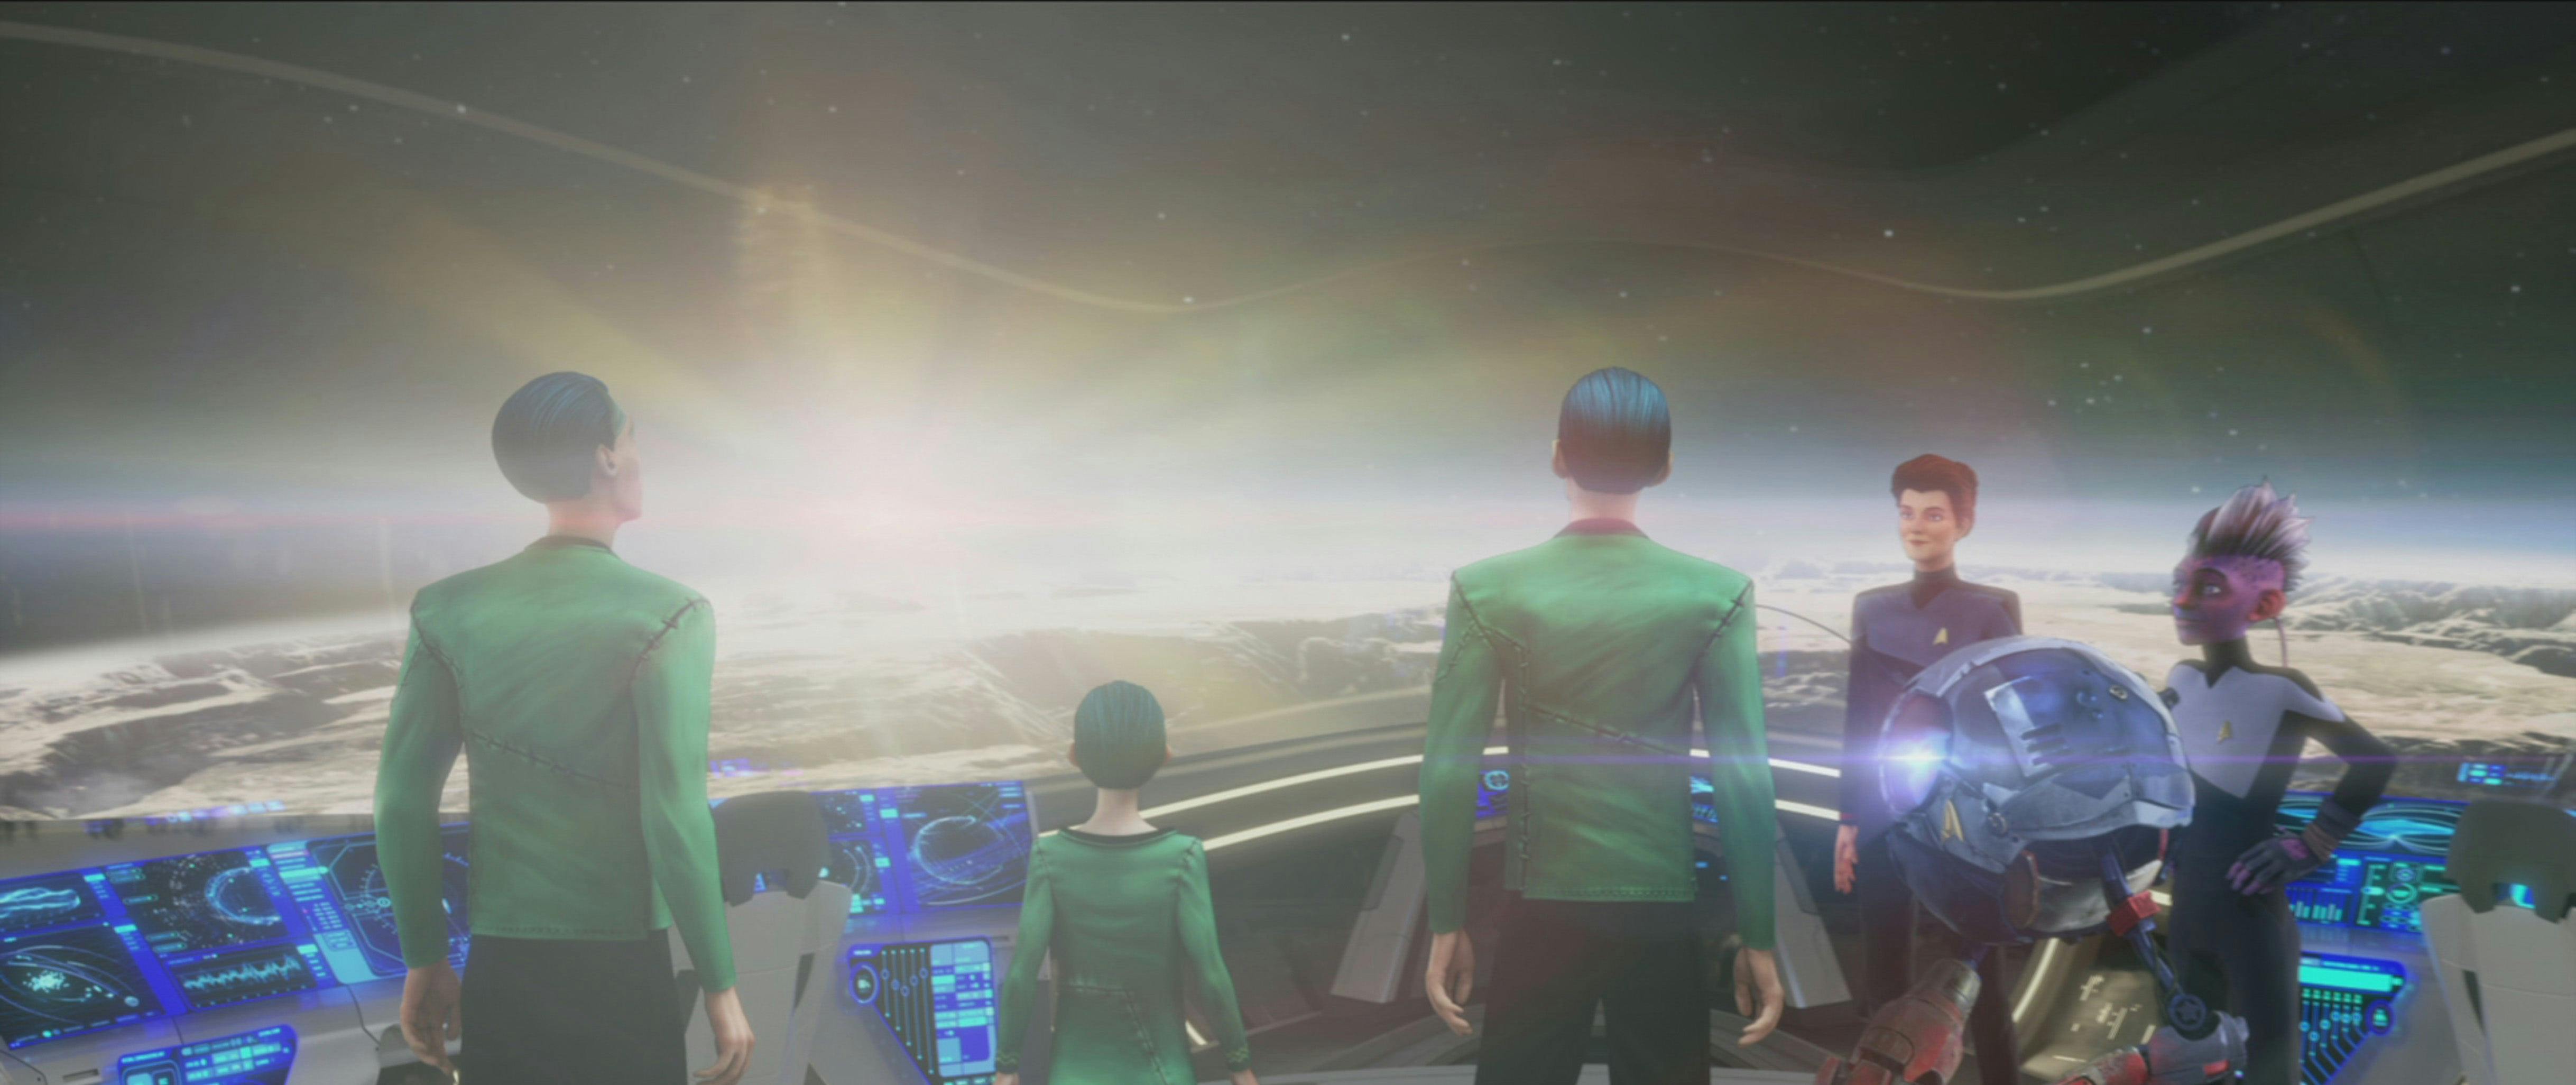 On the Protostar, Holo-Janeway, Zero, and Dal look over three Enderprizians who look over their planet from above on Star Trek: Prodigy